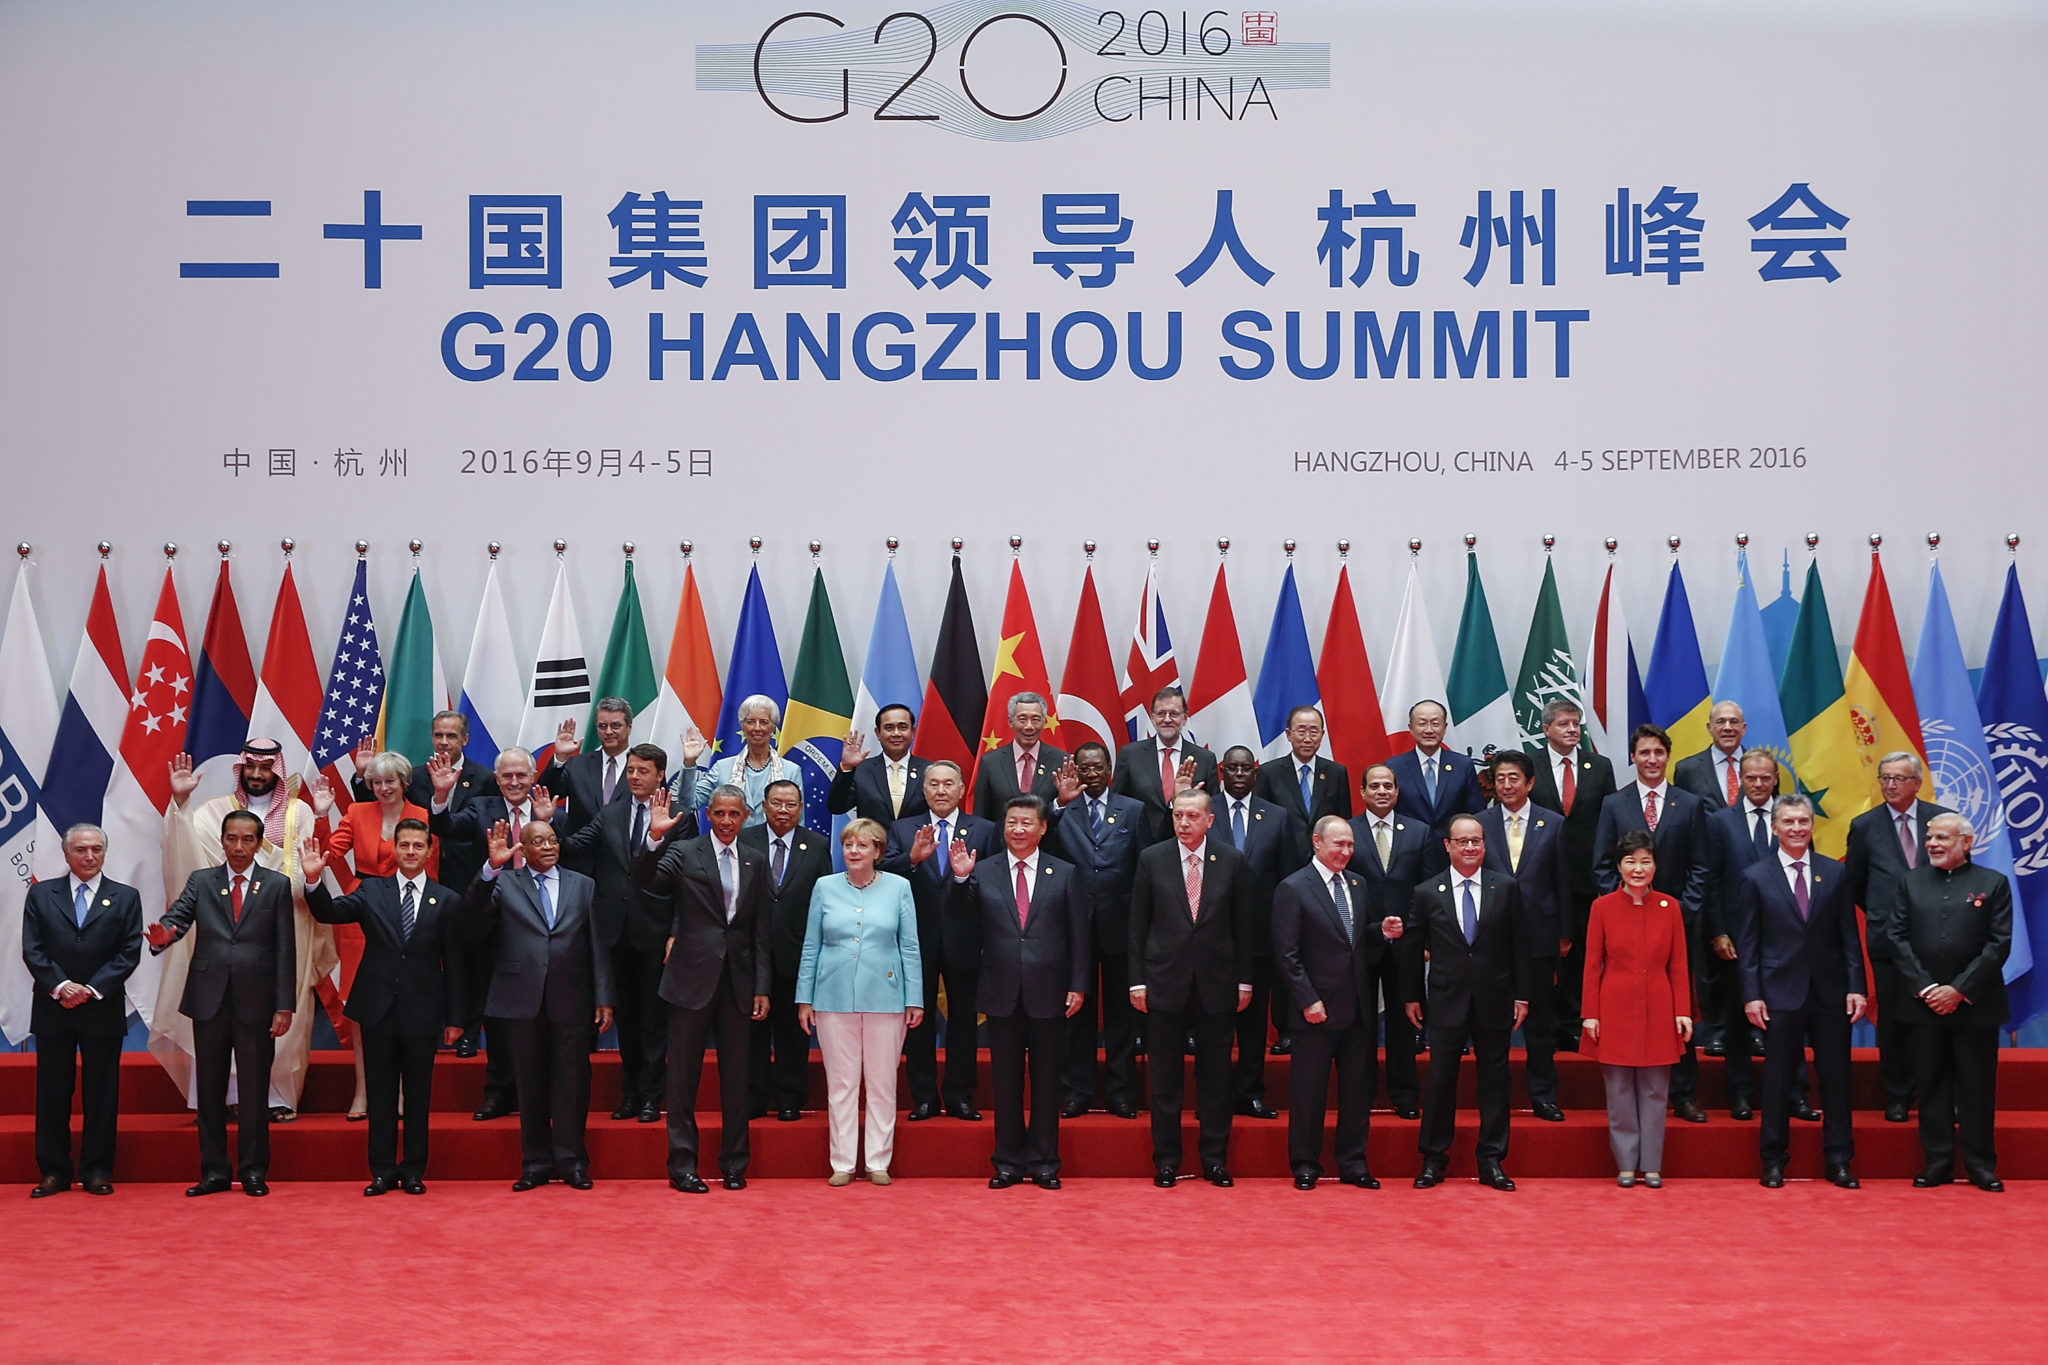 Is the G20 wilfully negligent in dealing with the global refugee crisis?